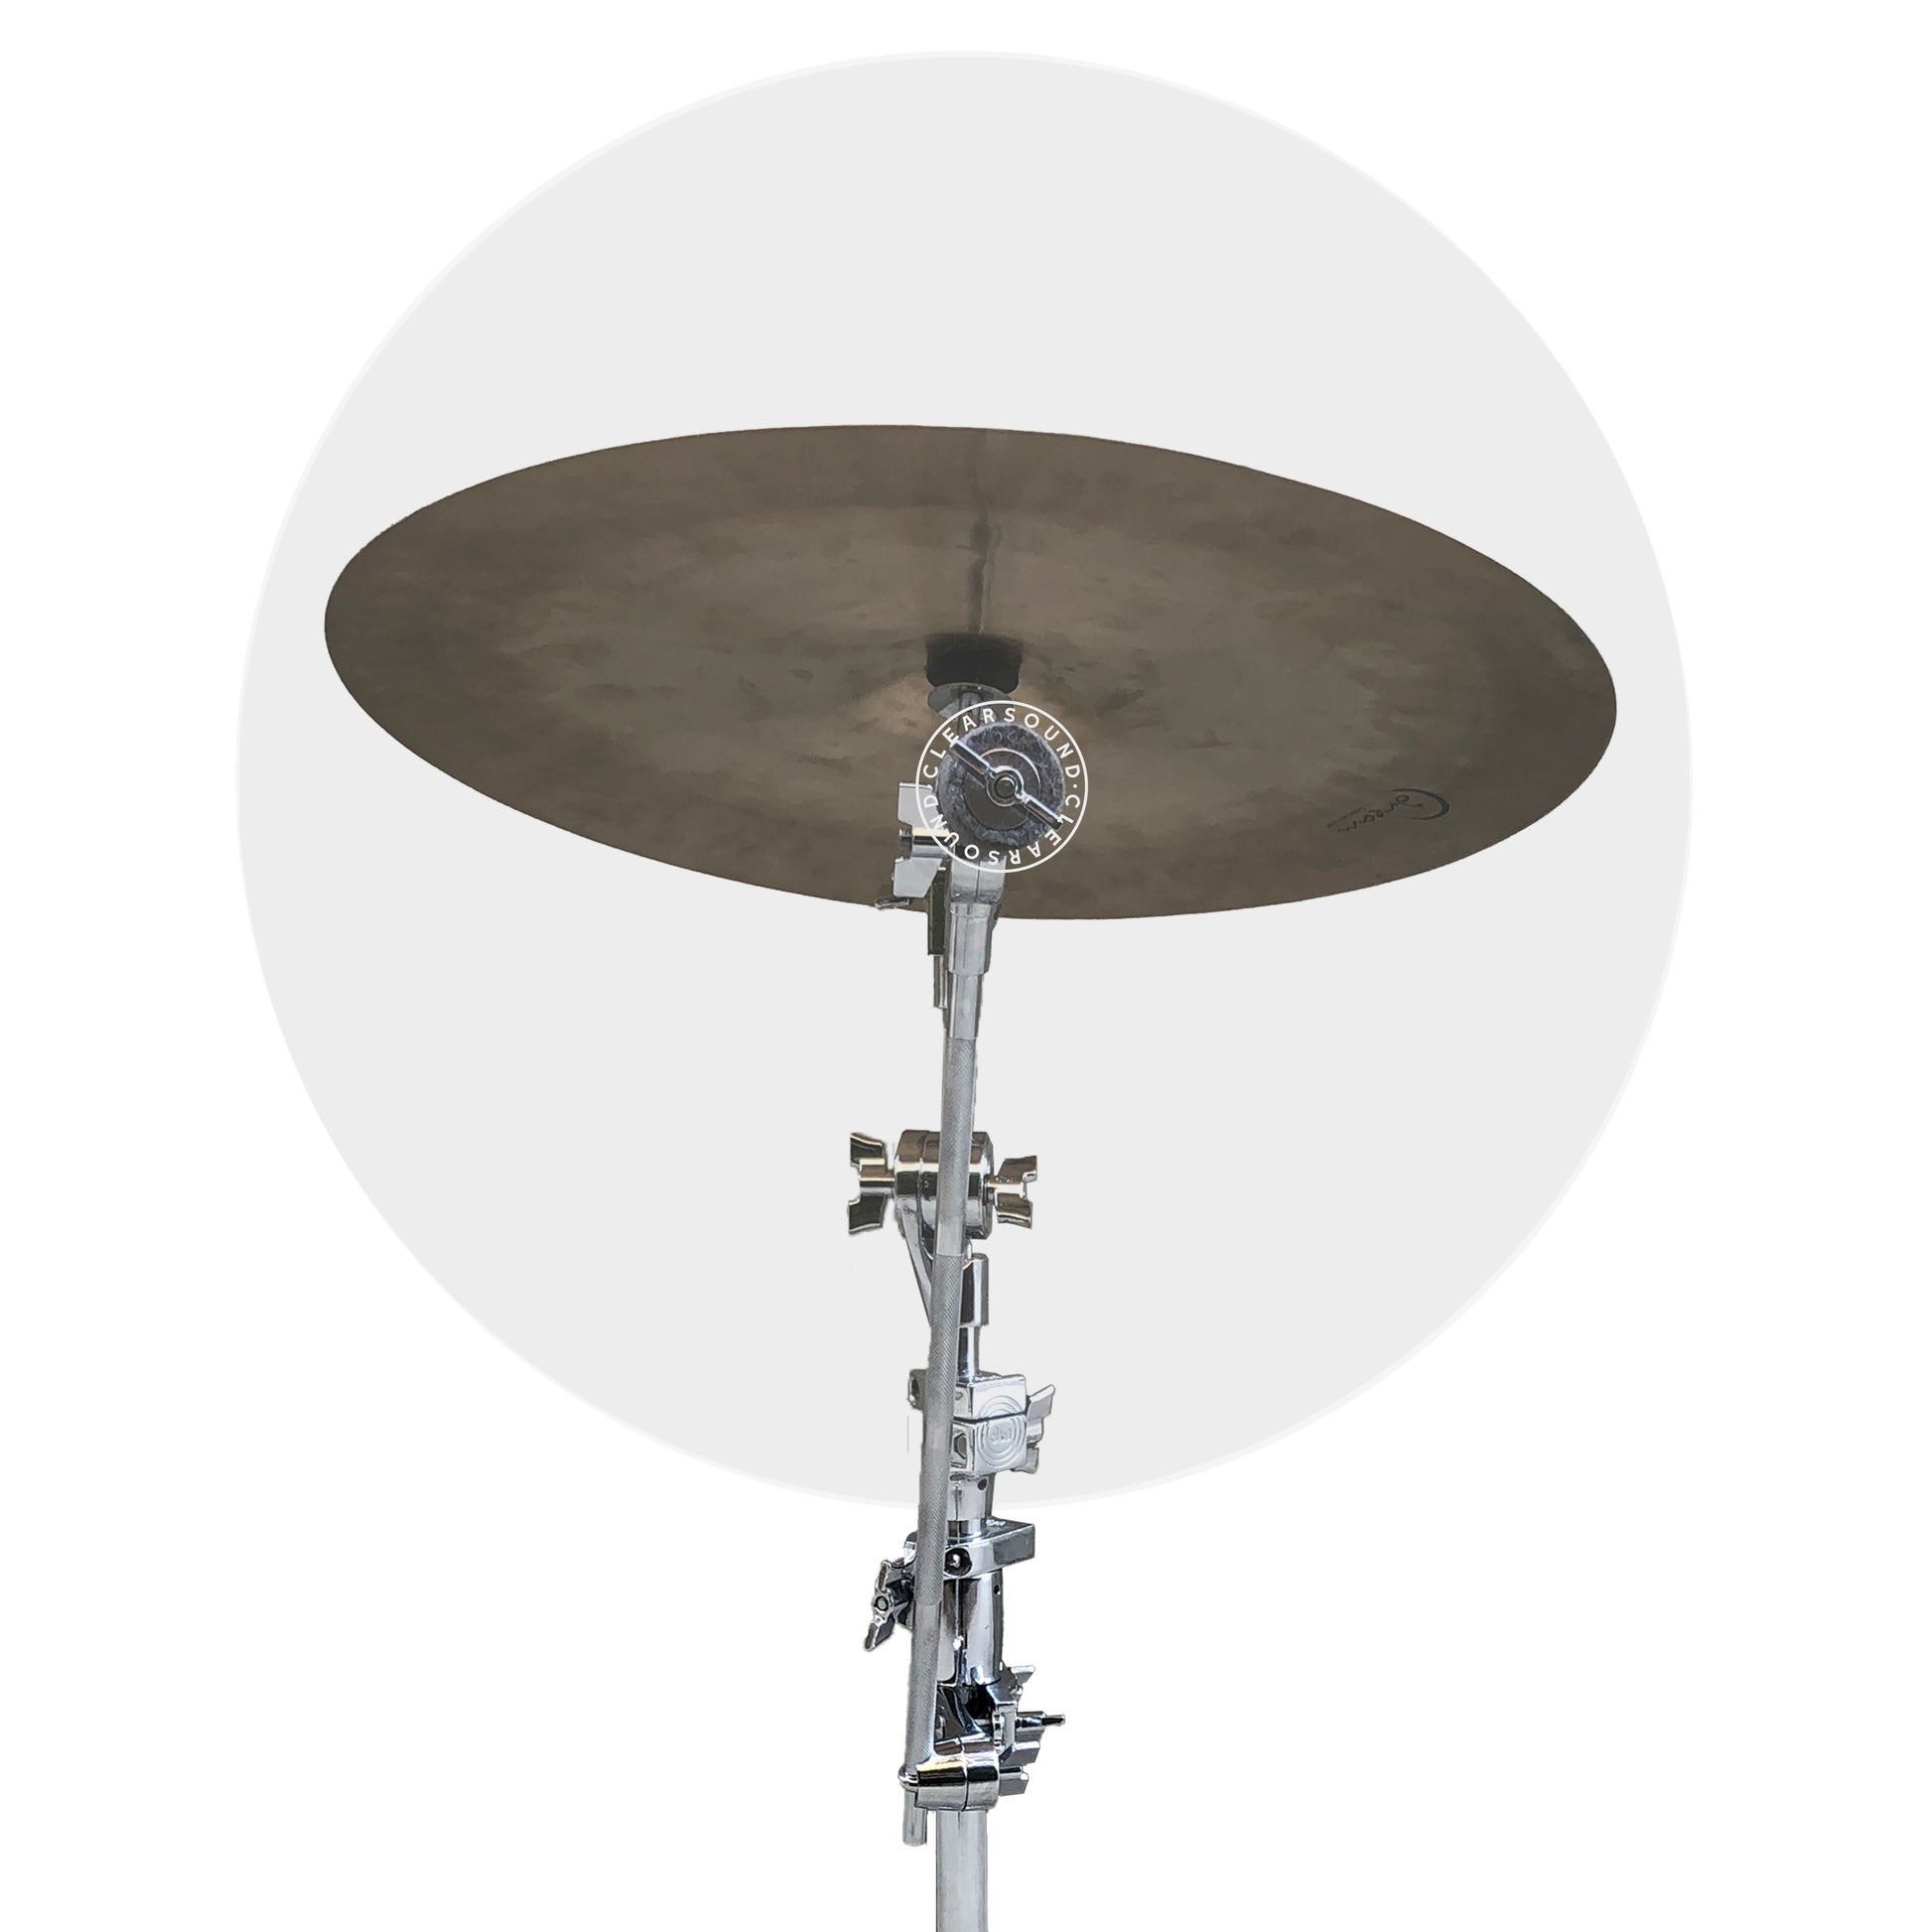 Cymbal Stand Baffle Mount. Cymbal Baffles and Stands, Shy Baffles and Sets.